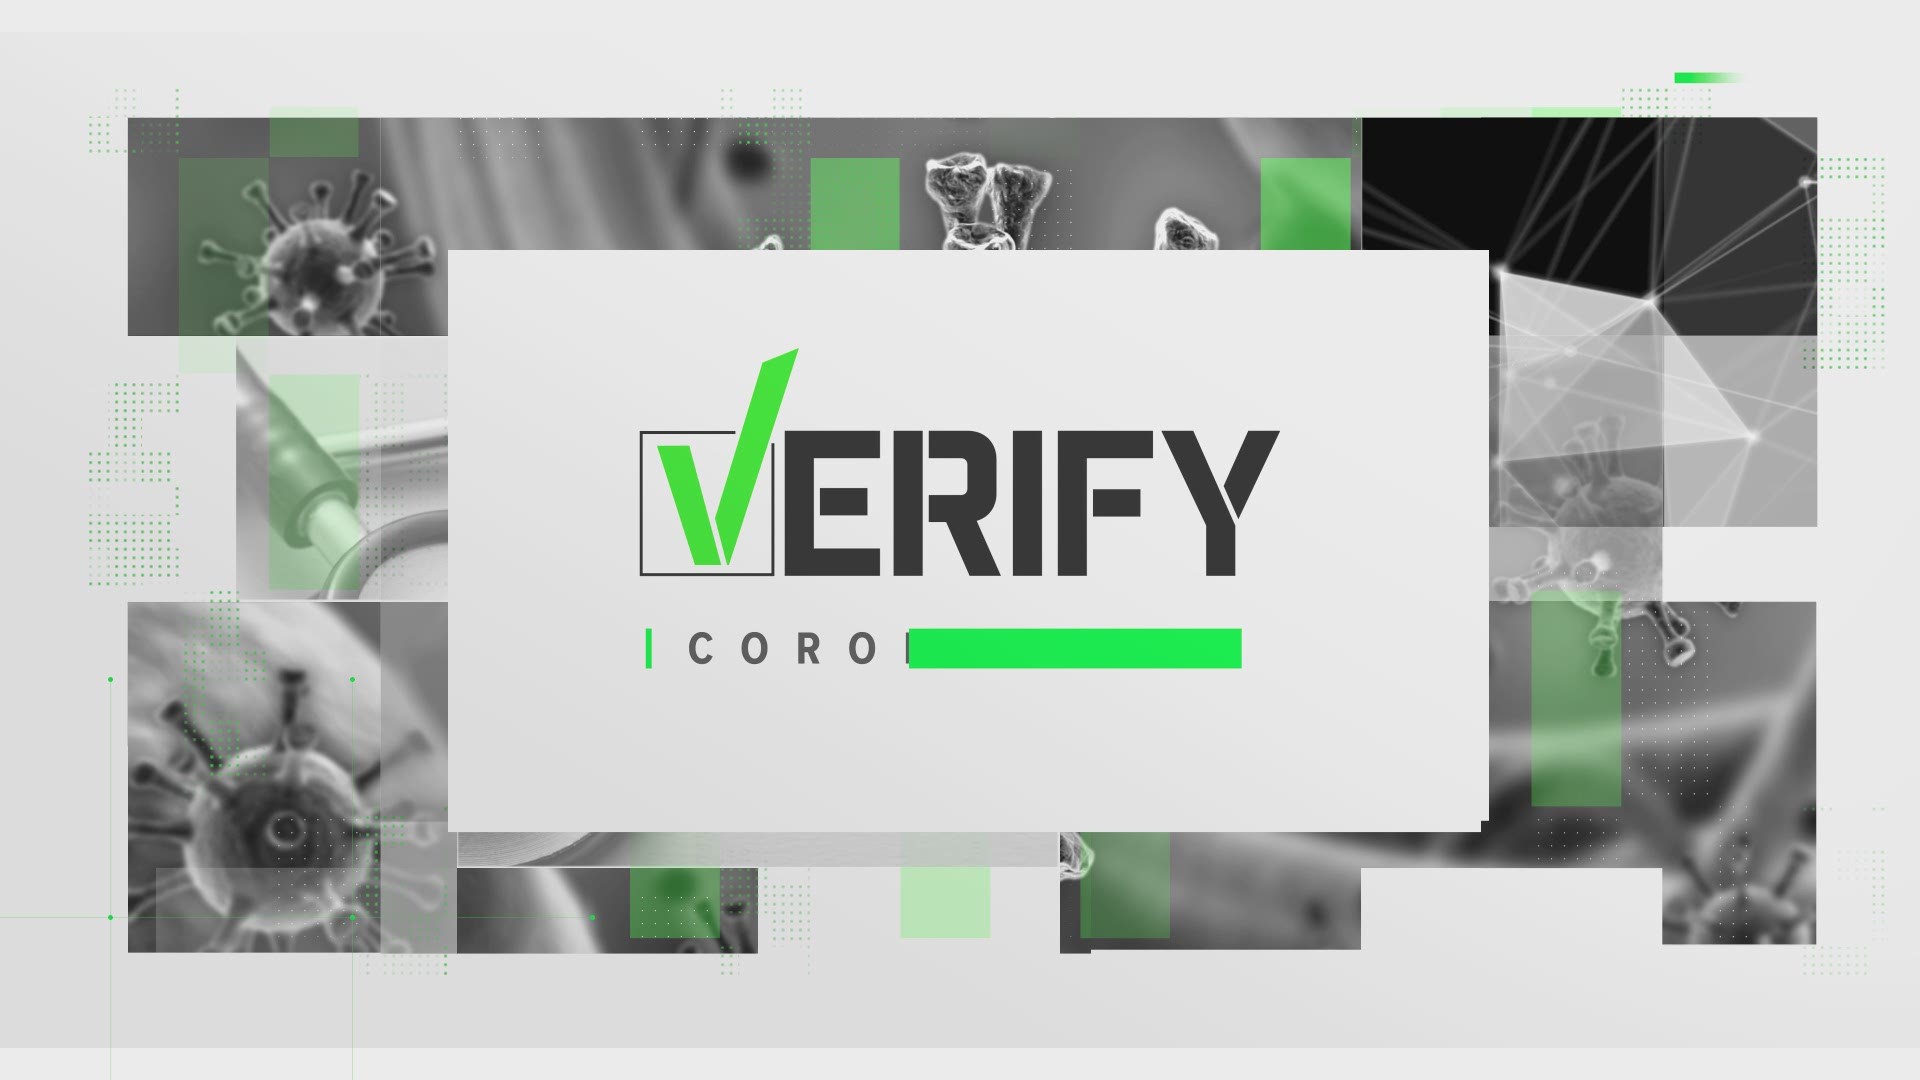 The Verify team looked into online rumors, claiming that undocumented immigrants are receiving $1,800, while citizens are getting $600. This is false.